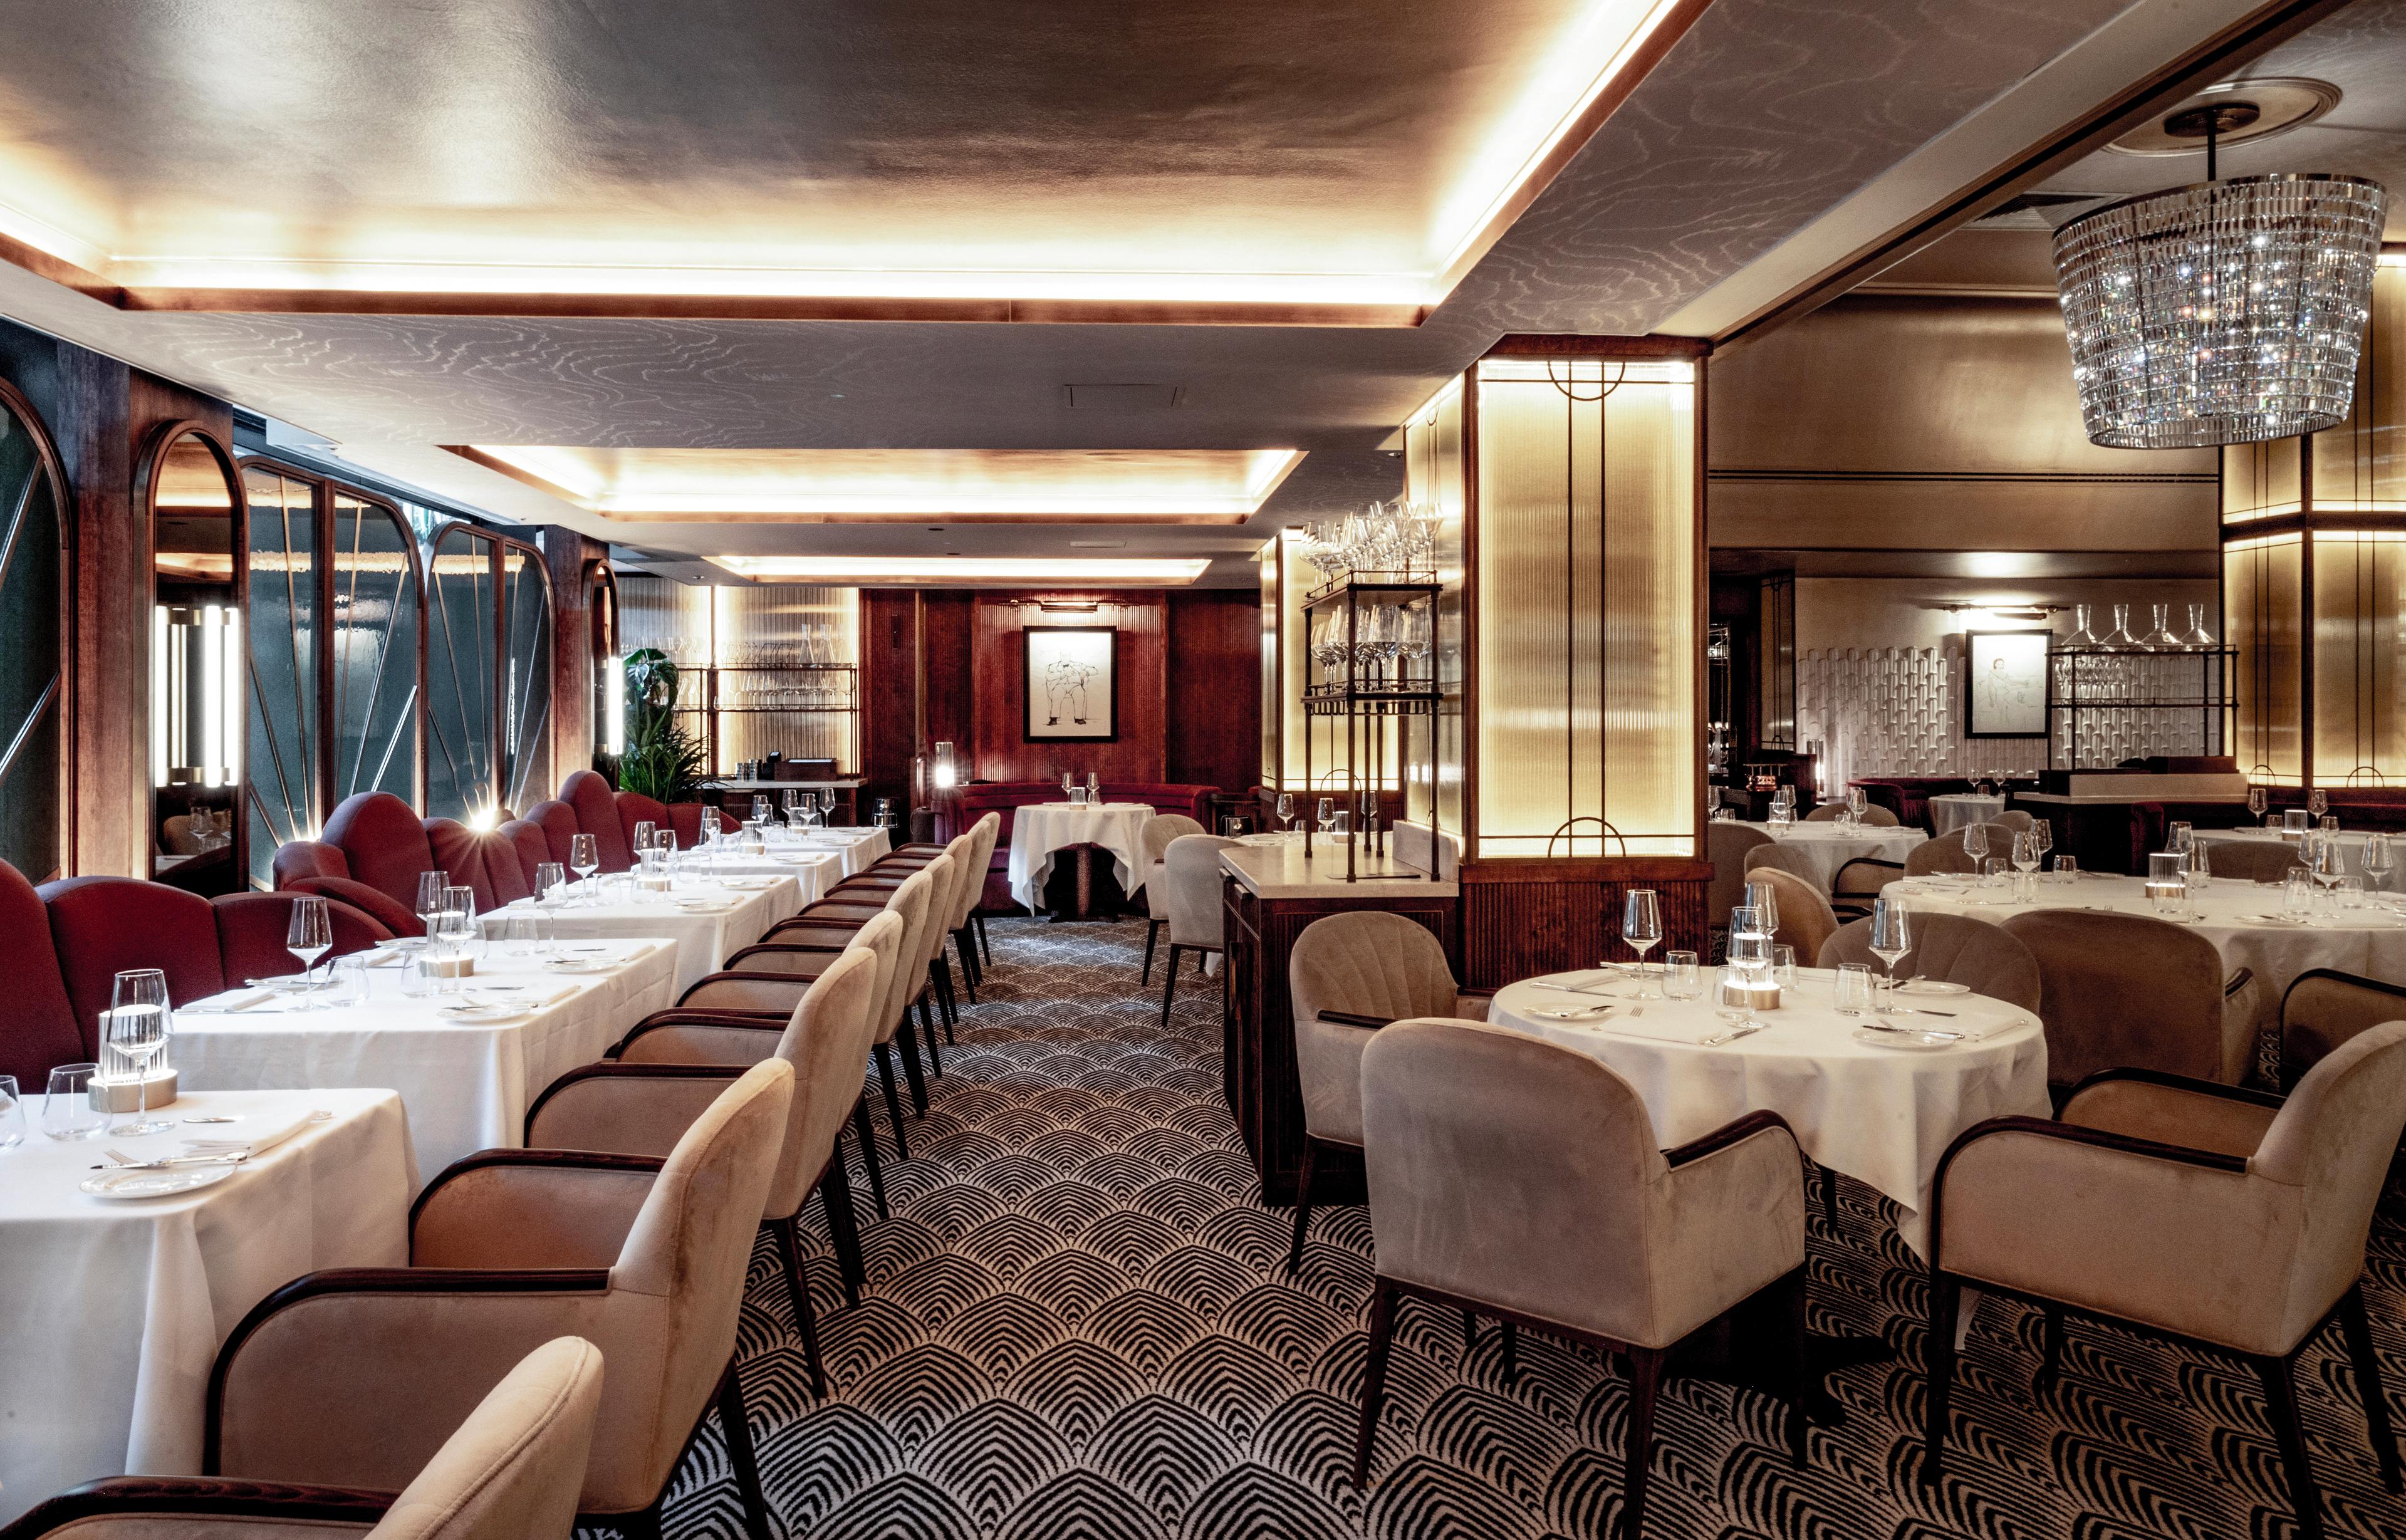 Savoy Grill By Gordon Ramsay, Chef's Table photo #7